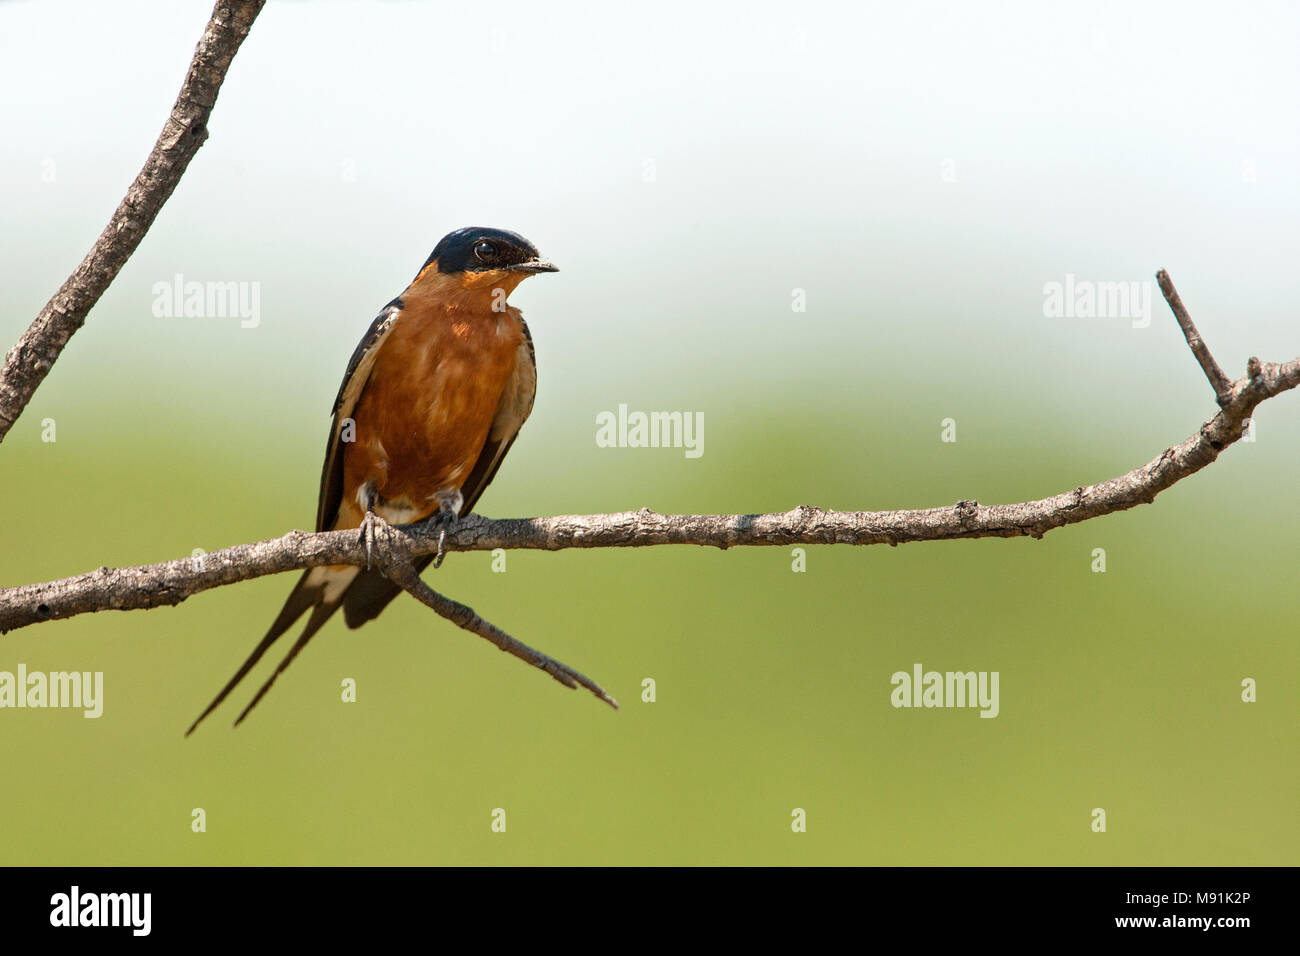 Roodborstzwaluw zittend op tak, Rufous-chested Swallow perched at branch Stock Photo